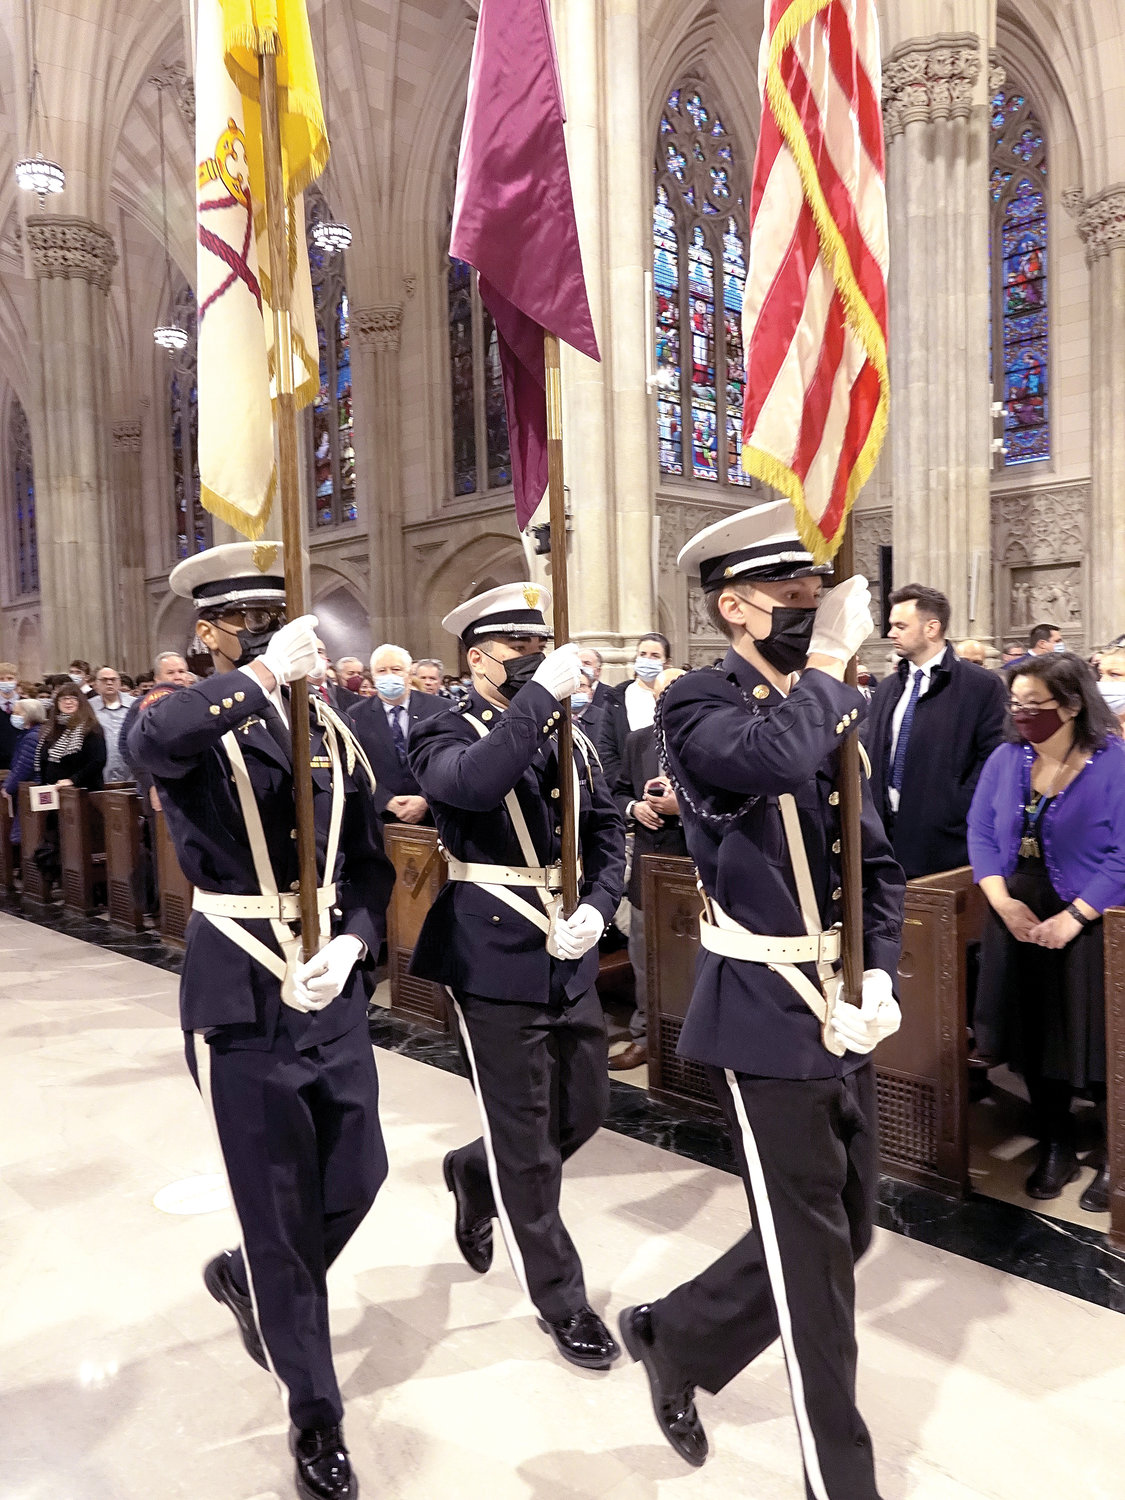 Three student members of the Junior Reserve Officers Training Corps lead the procession at the start of Mass.